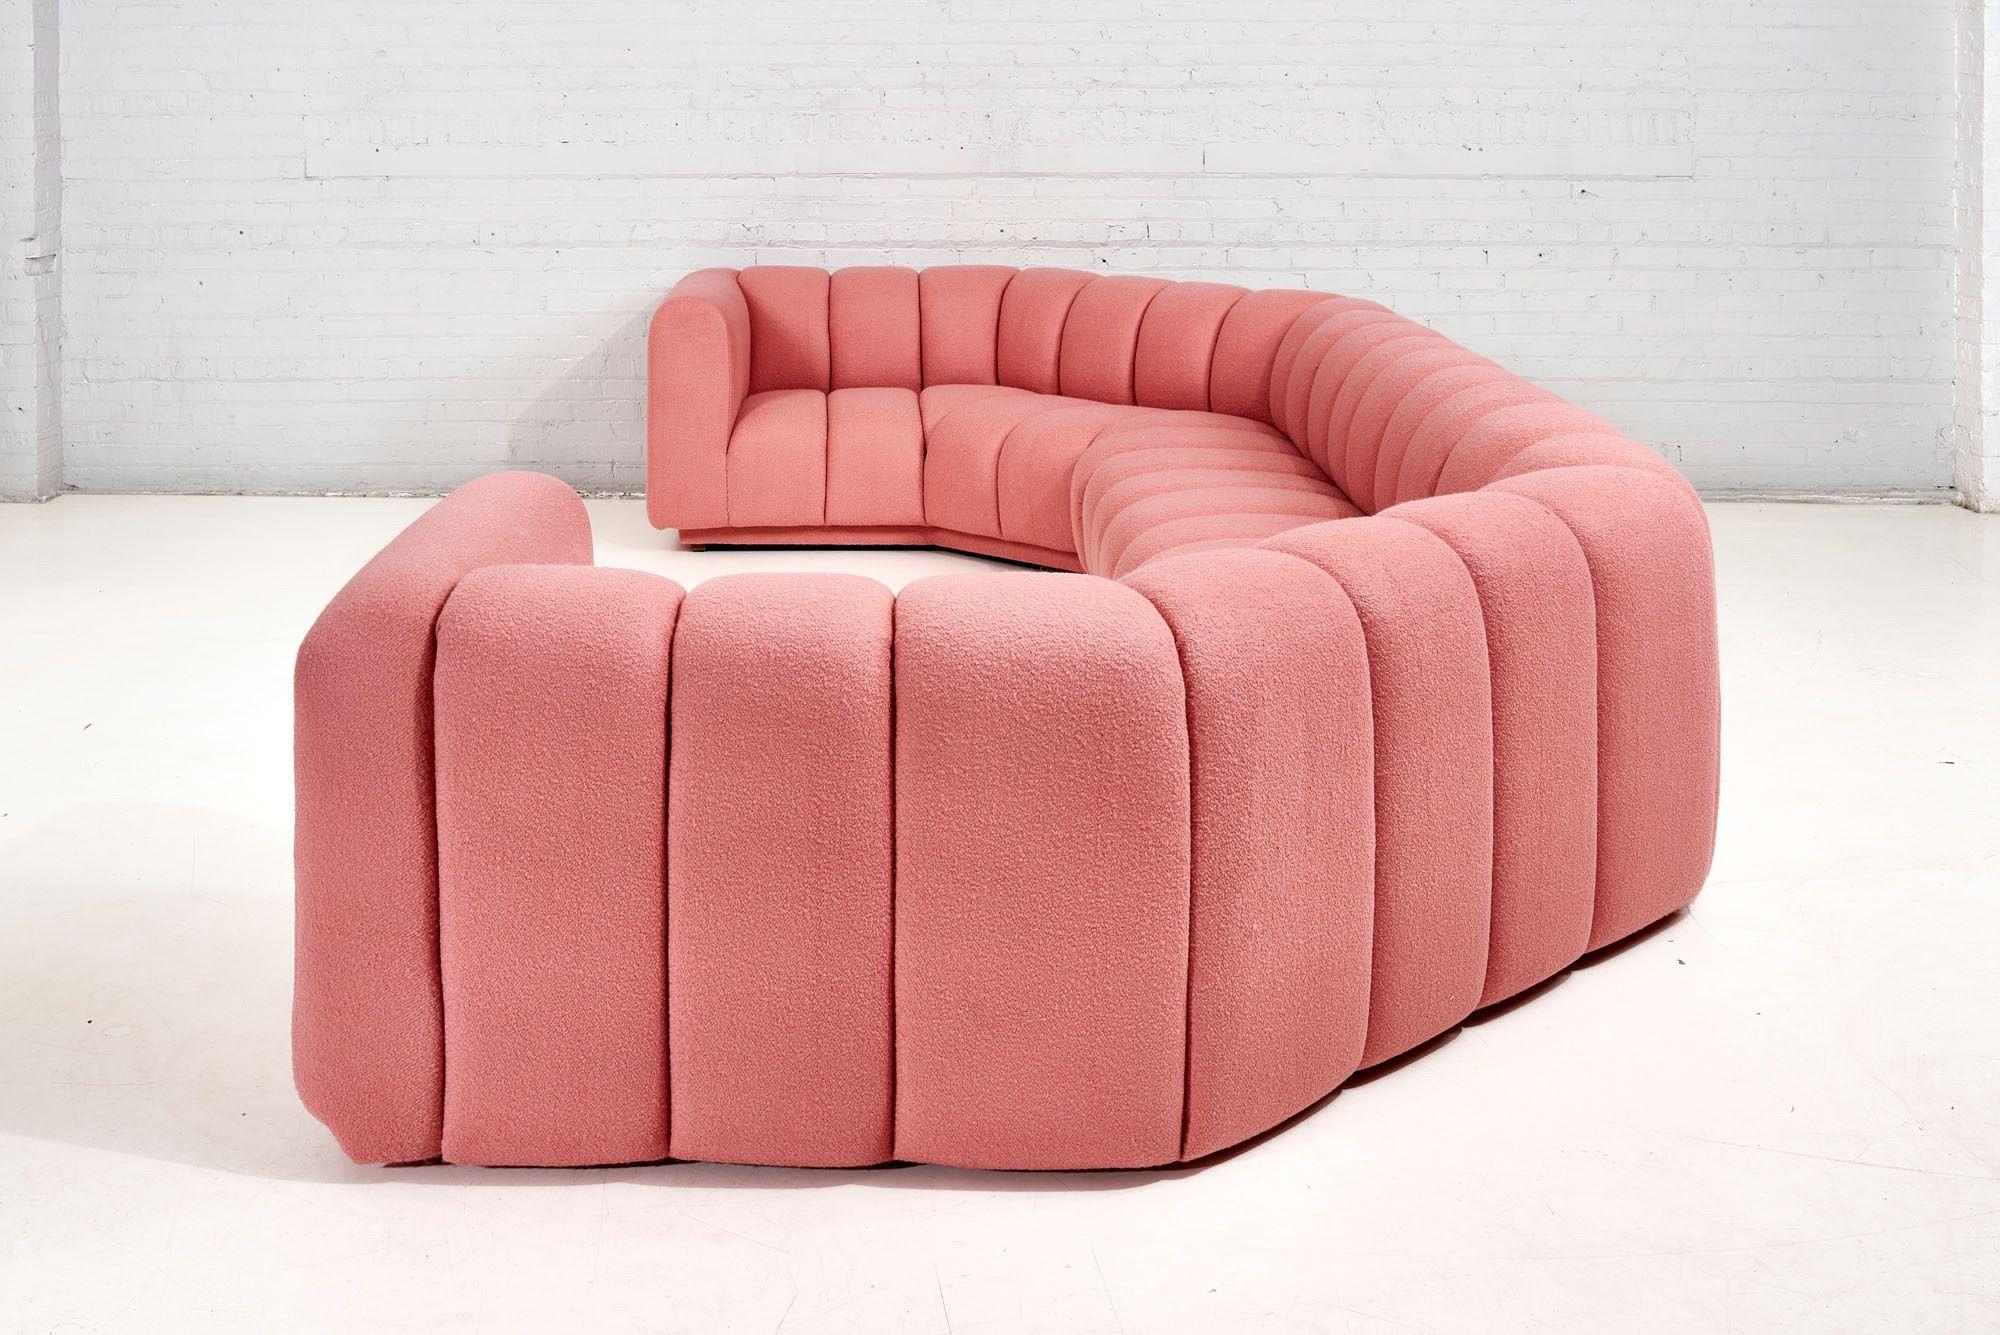 Bernhardt 3 Piece Sectional Channel Tufted Pink Bouclé, 1970 In Excellent Condition For Sale In Chicago, IL